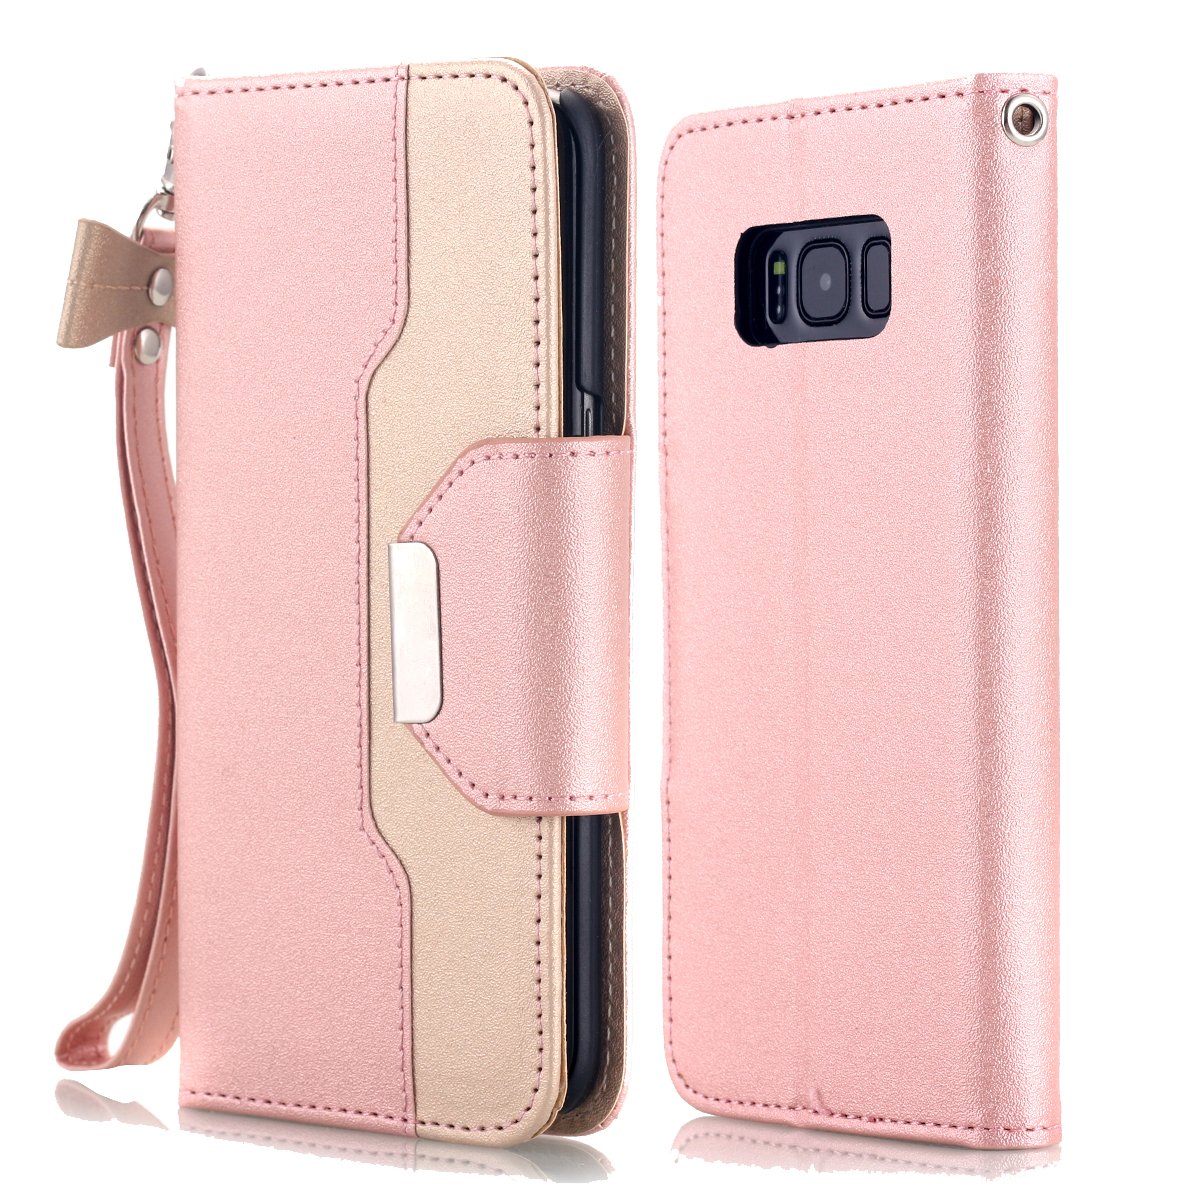 AICase Wallet PU Leather Flip Kickstand Case with Card Slots Make Up Mirror Detachable Wrist Strap Folding Stand Protective Cover